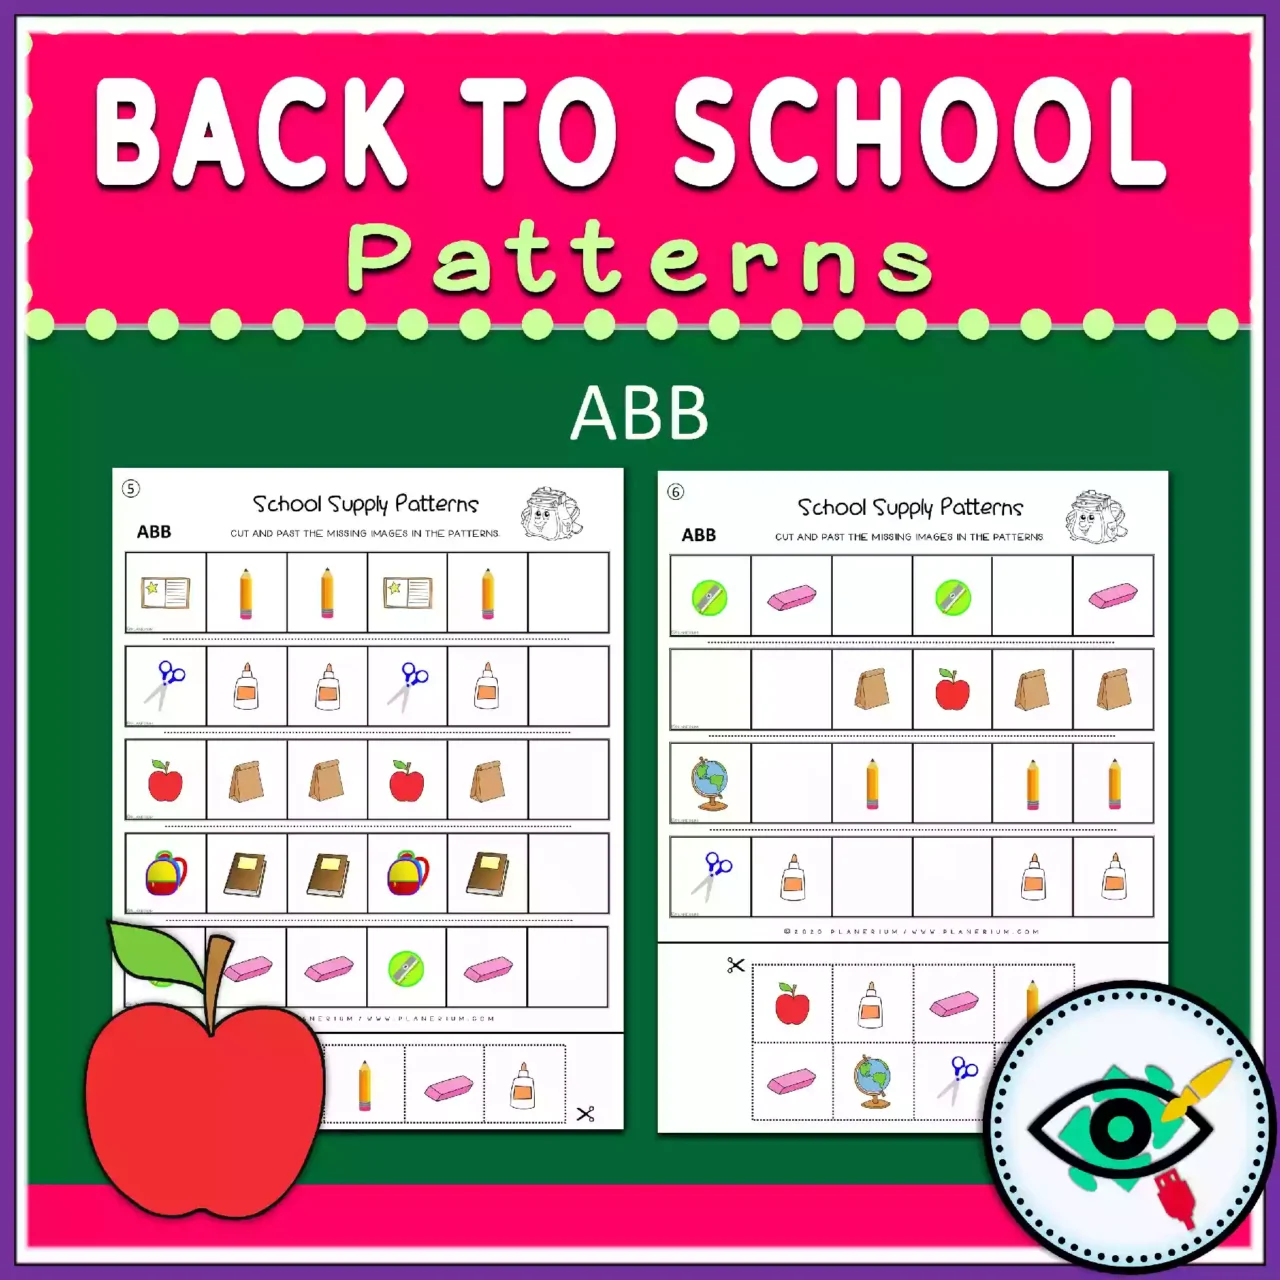 Back to School Patterns - Featured 4